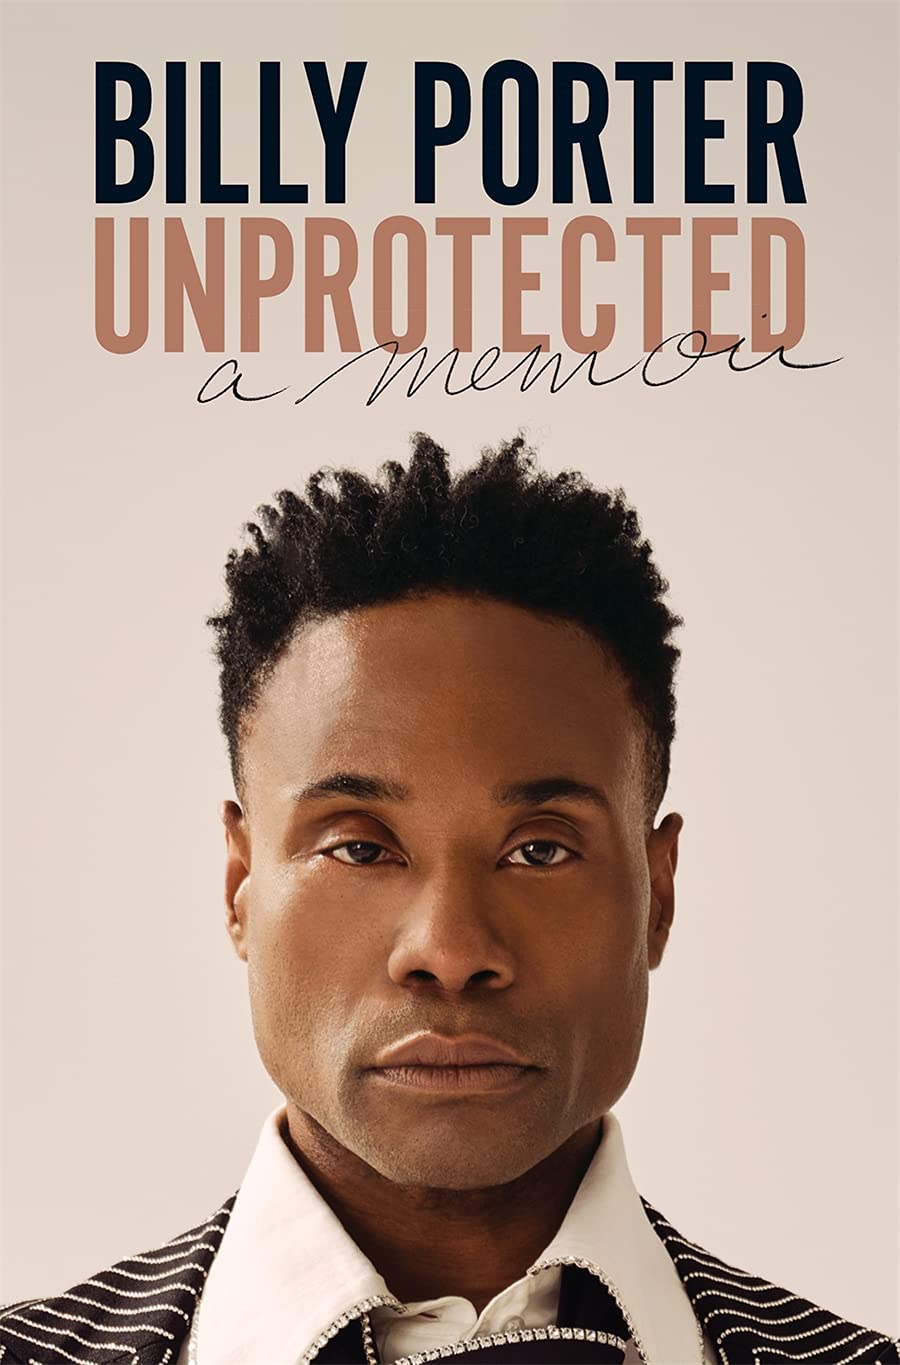 The book cover for Unpotected.